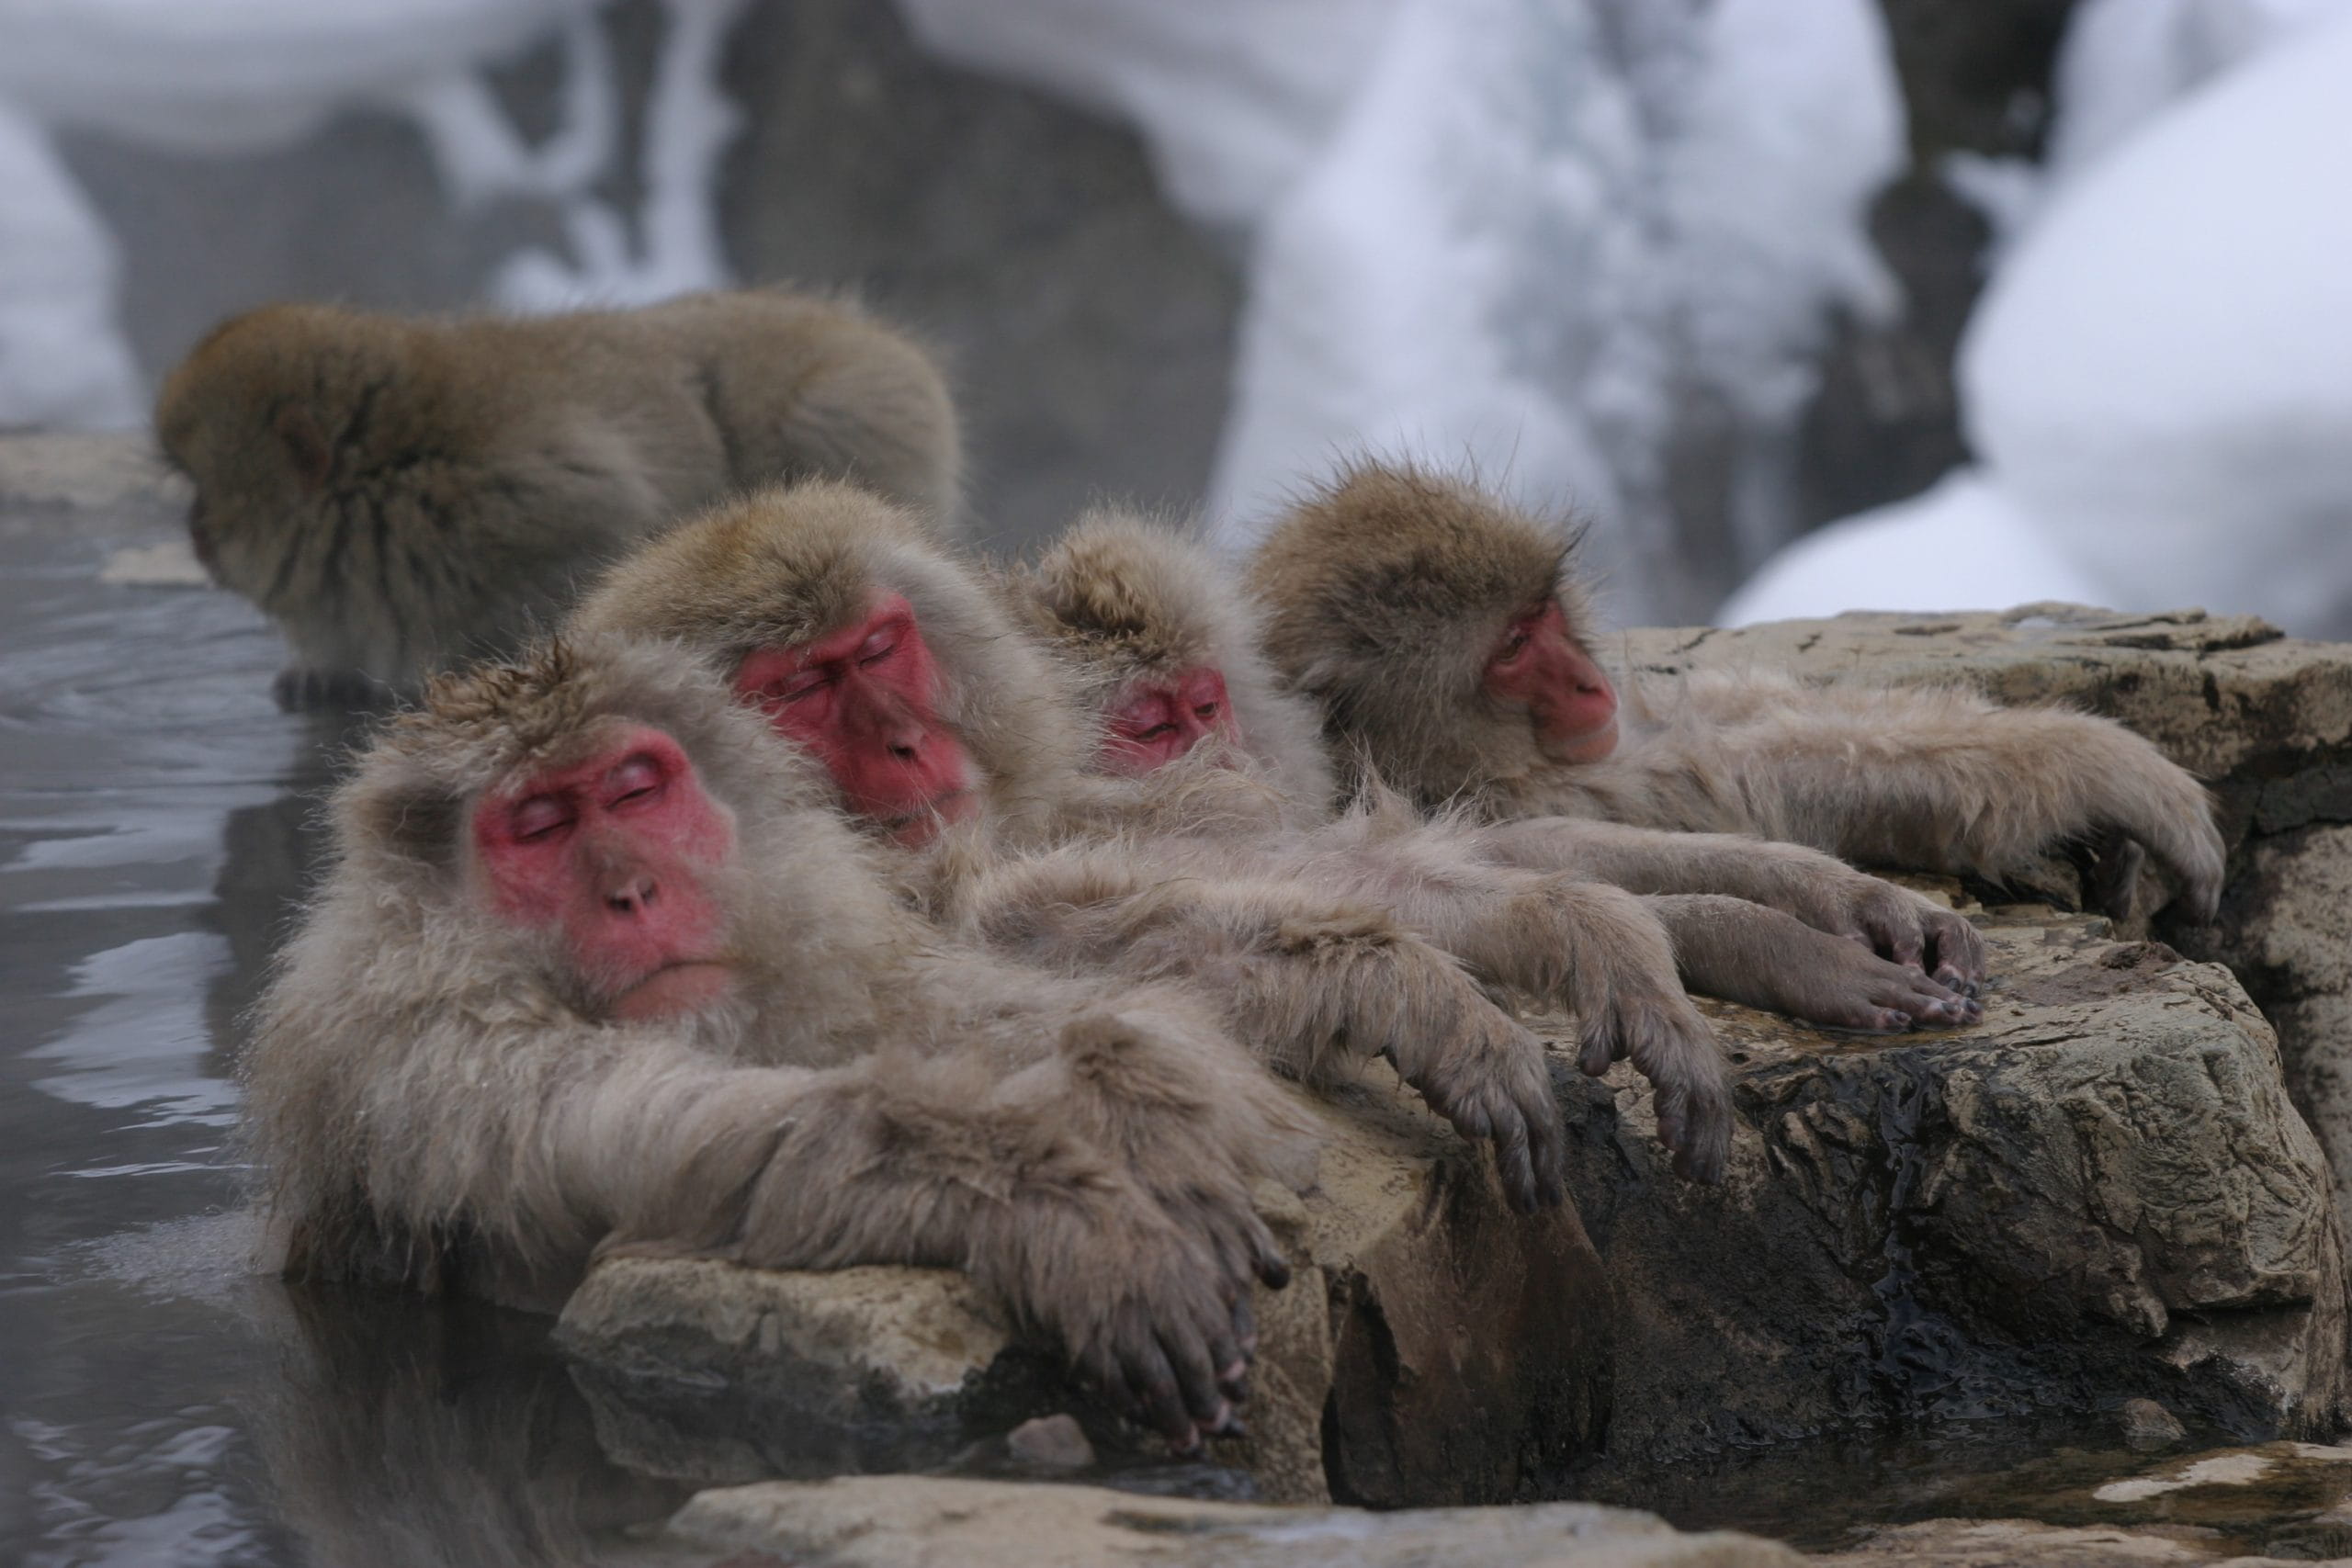 Enjoy the changing beauty of cherry blossoms, fall leaves, and snow monkeys all in the ironically nicknamed Hell’s Valley.